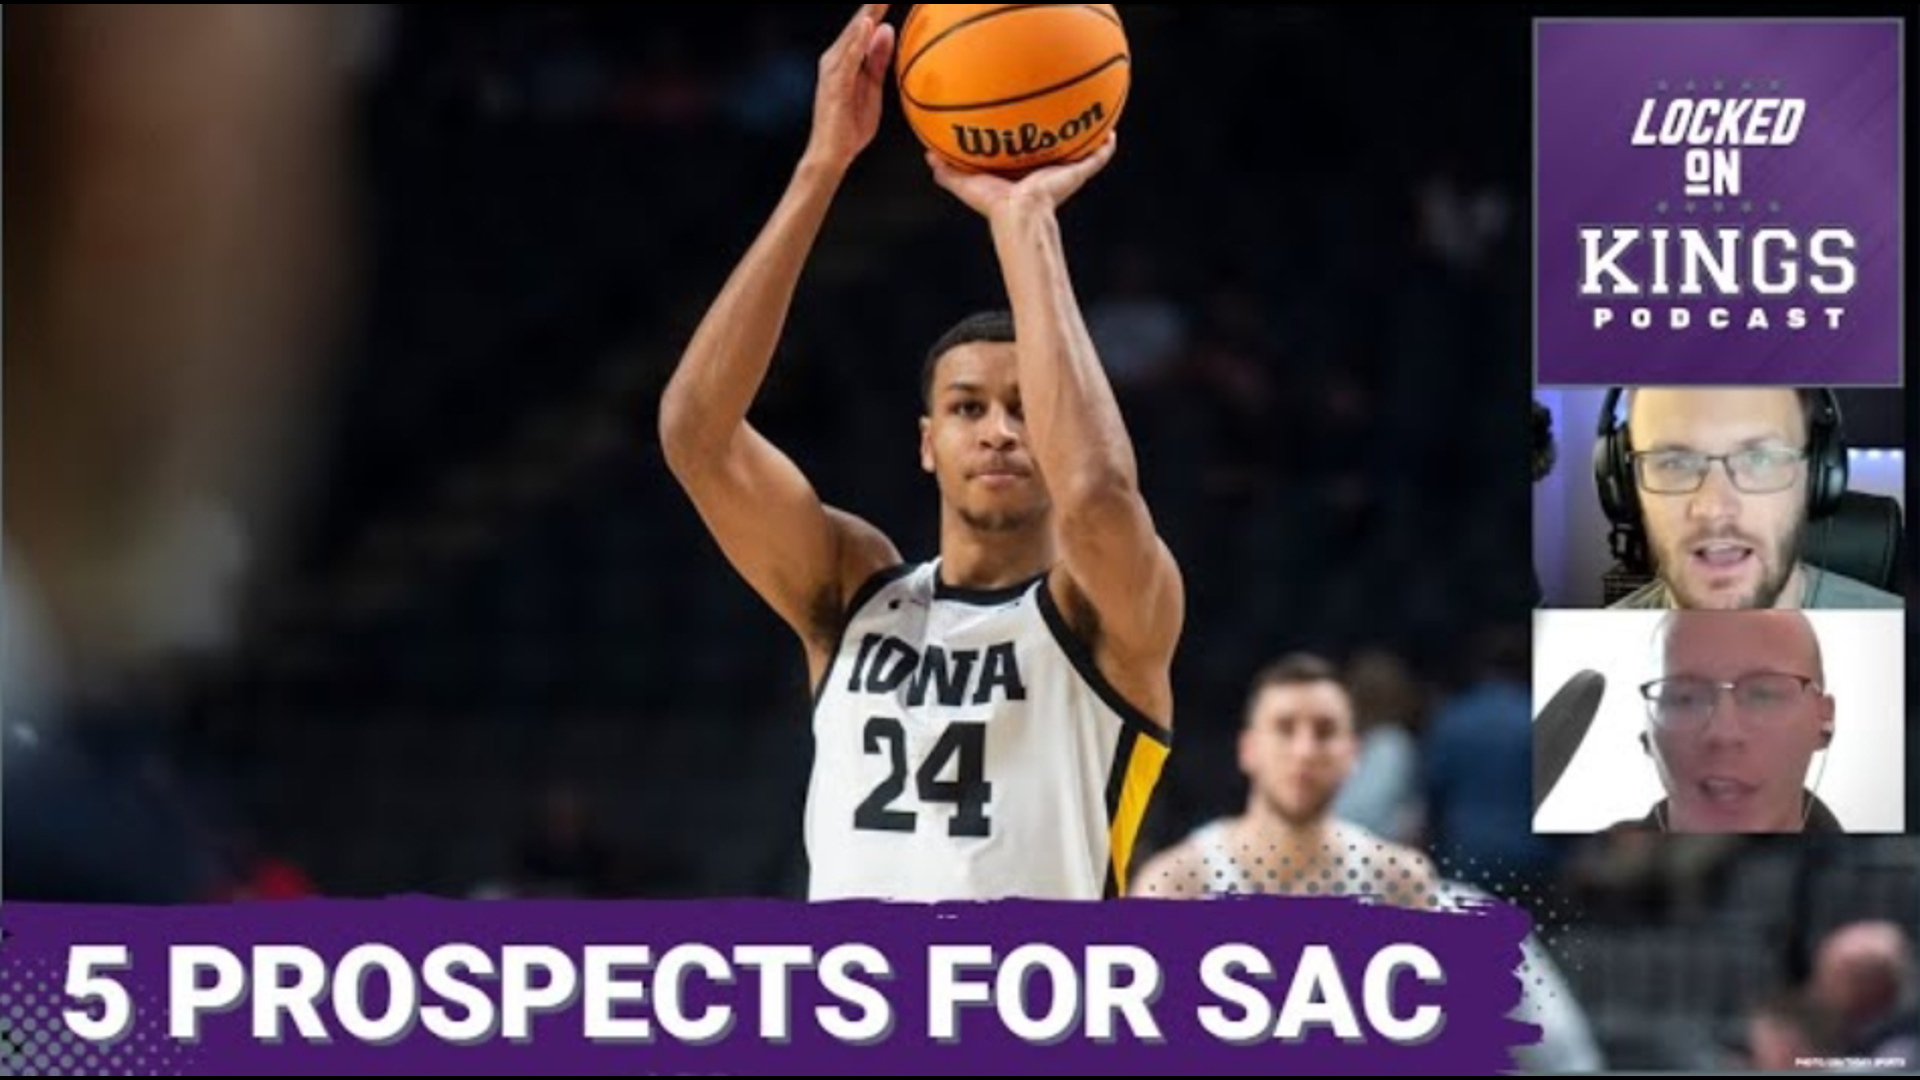 Matt George is joined by Sam Ferris of the Draft Dummies, a contributor to the Locked On NBA Big Board podcast, who gives us five prospects for the Sacramento Kings.